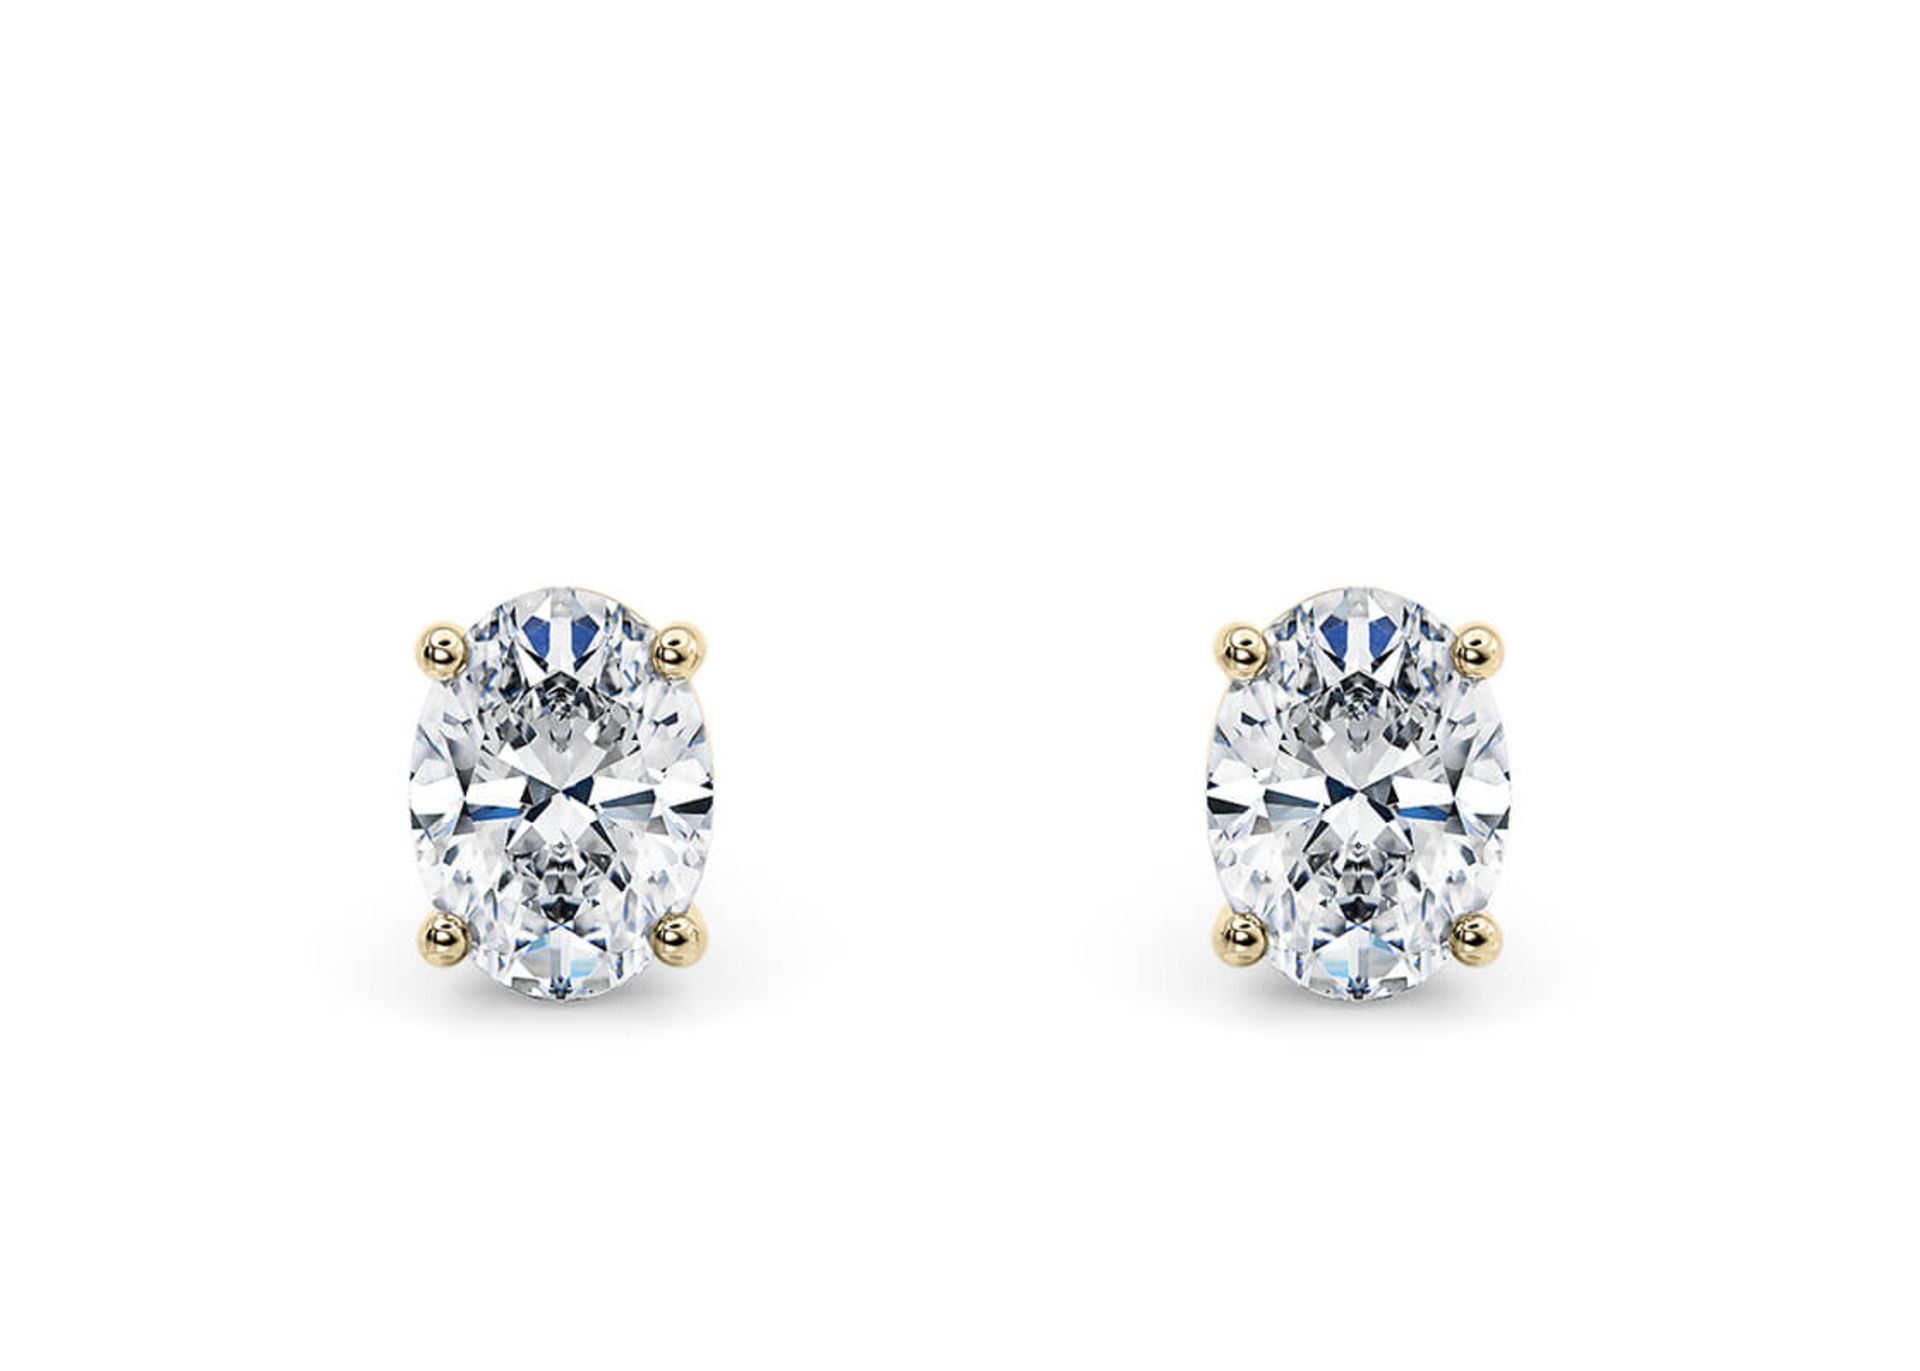 Oval Cut 2.00 Carat Natural Diamond Earrings Set in 18kt Yellow Gold - E Colour SI Clarity - GIA